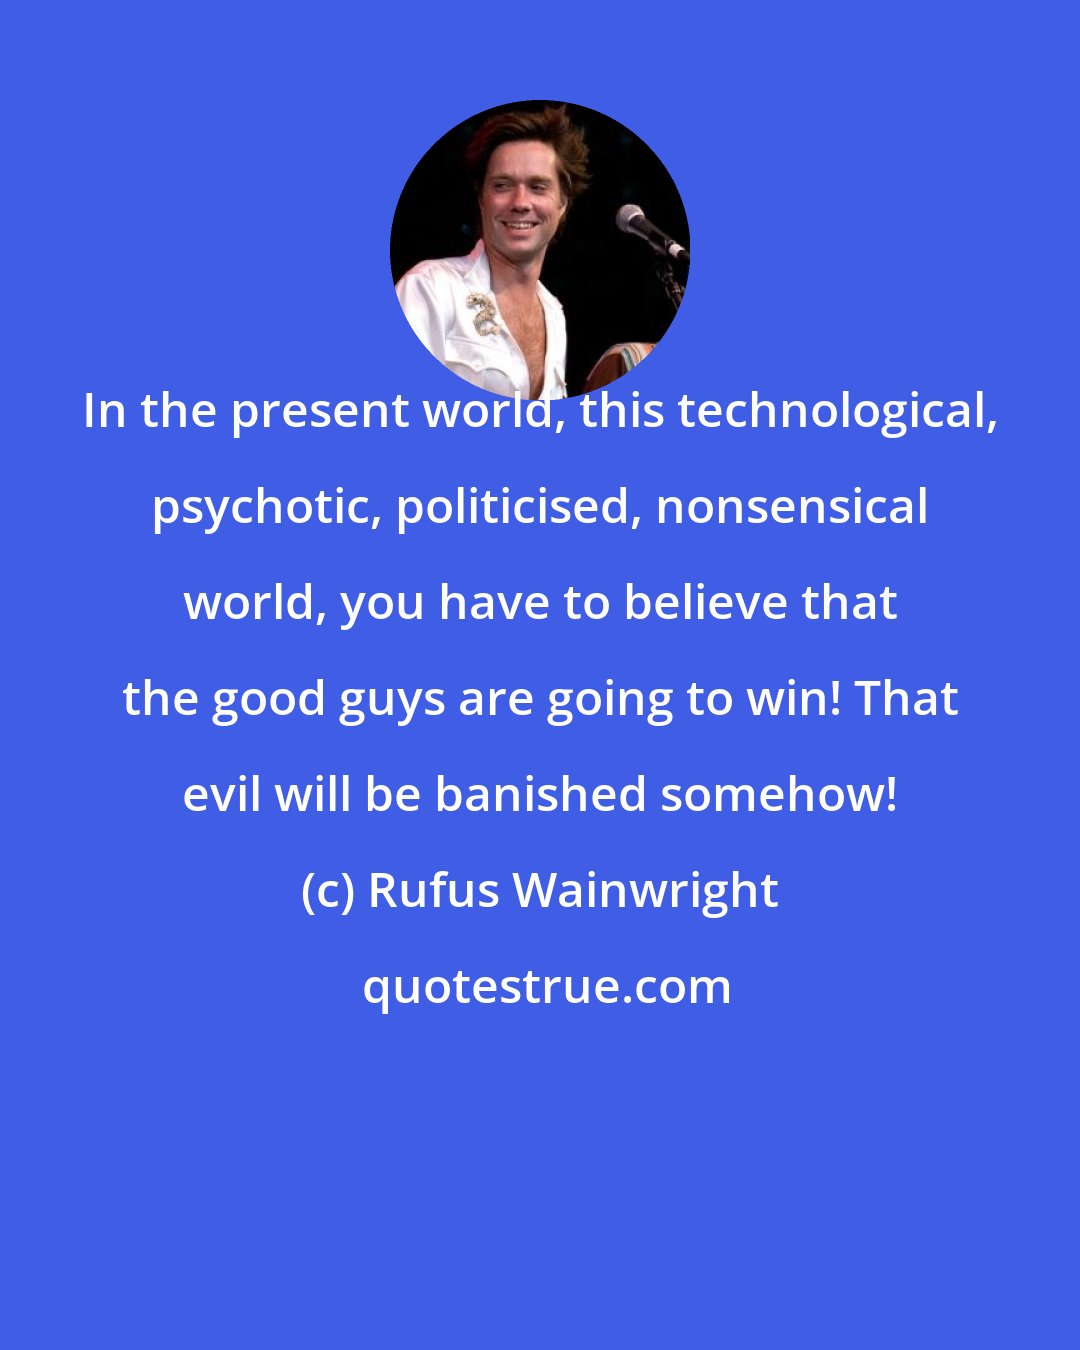 Rufus Wainwright: In the present world, this technological, psychotic, politicised, nonsensical world, you have to believe that the good guys are going to win! That evil will be banished somehow!